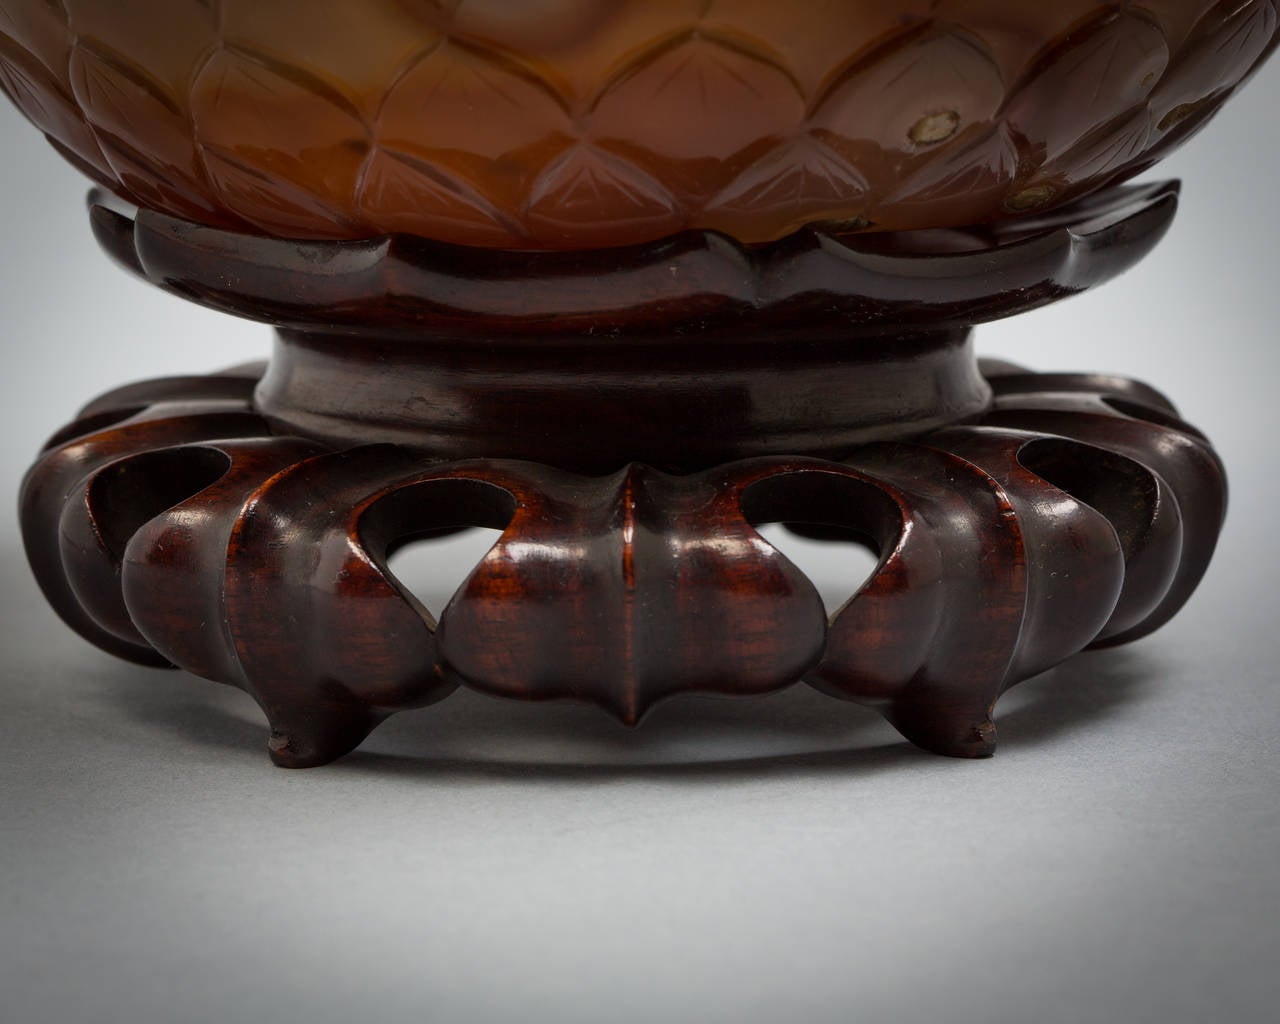 Chinese carved agate bowl on stand, 18th century.